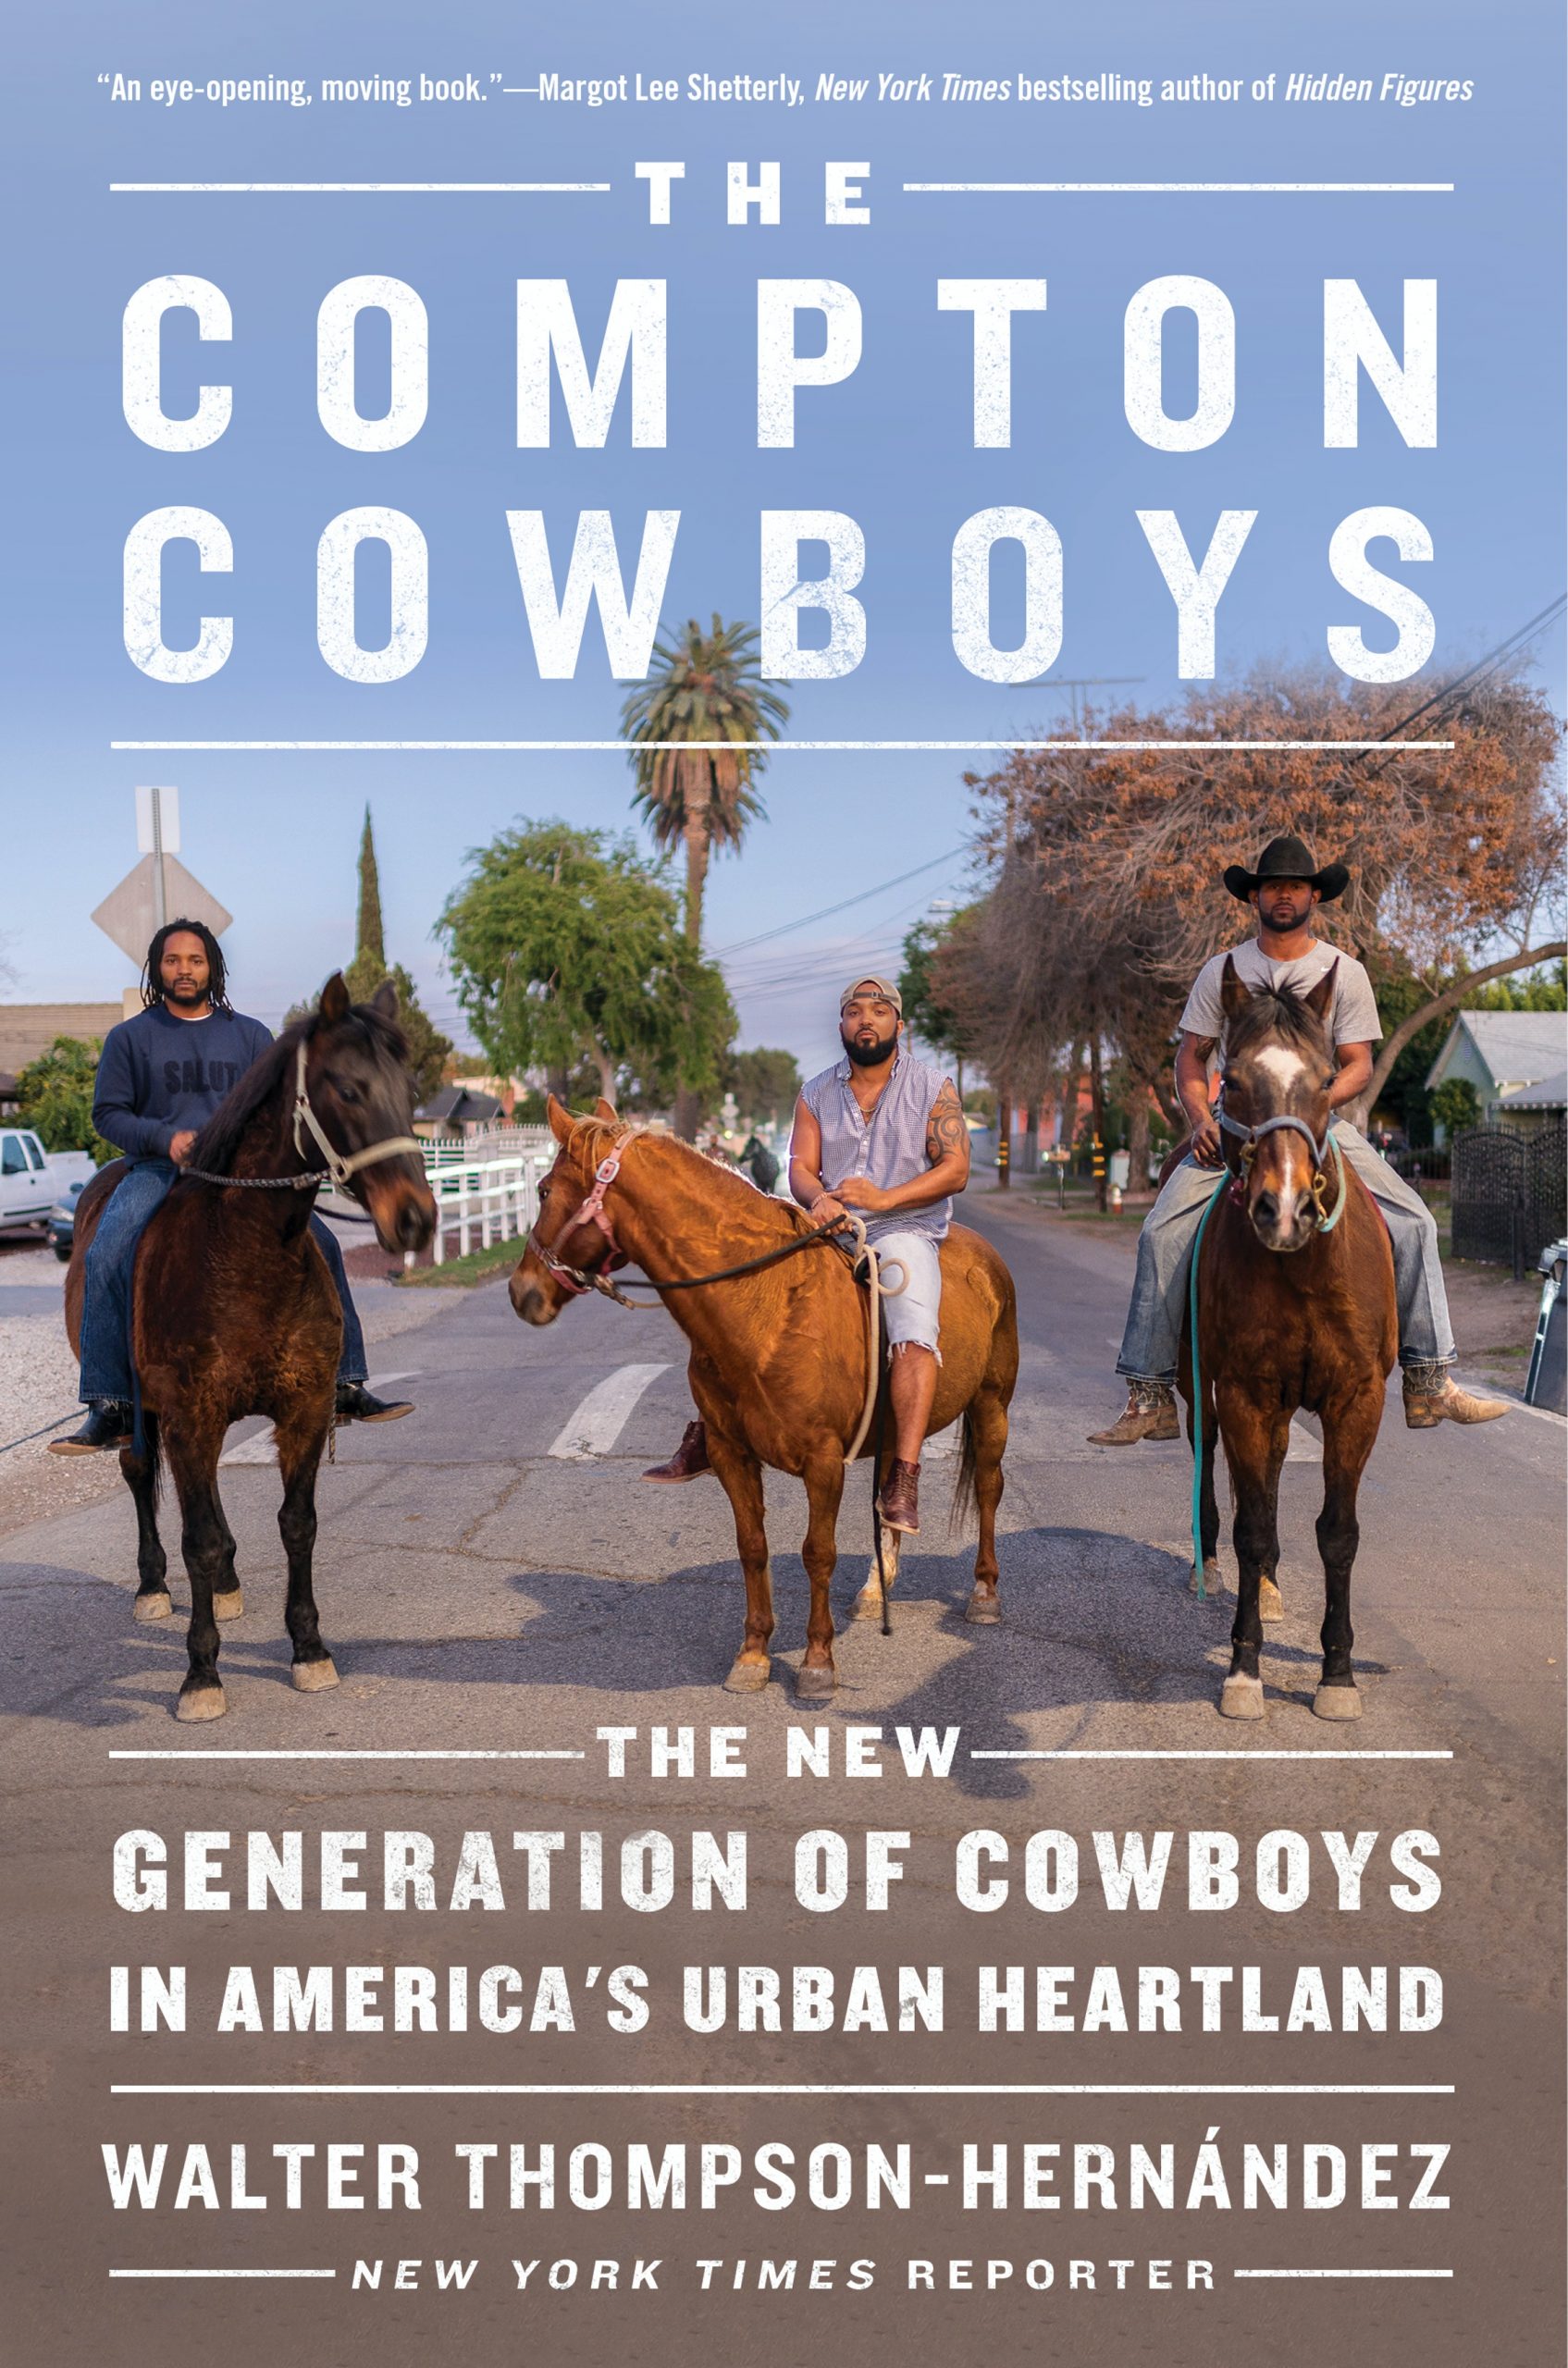 Cover art for Compton Cowboys: The New Generation of Cowboys in America’s Urban Heartland by Walter Thompson-Hernández.